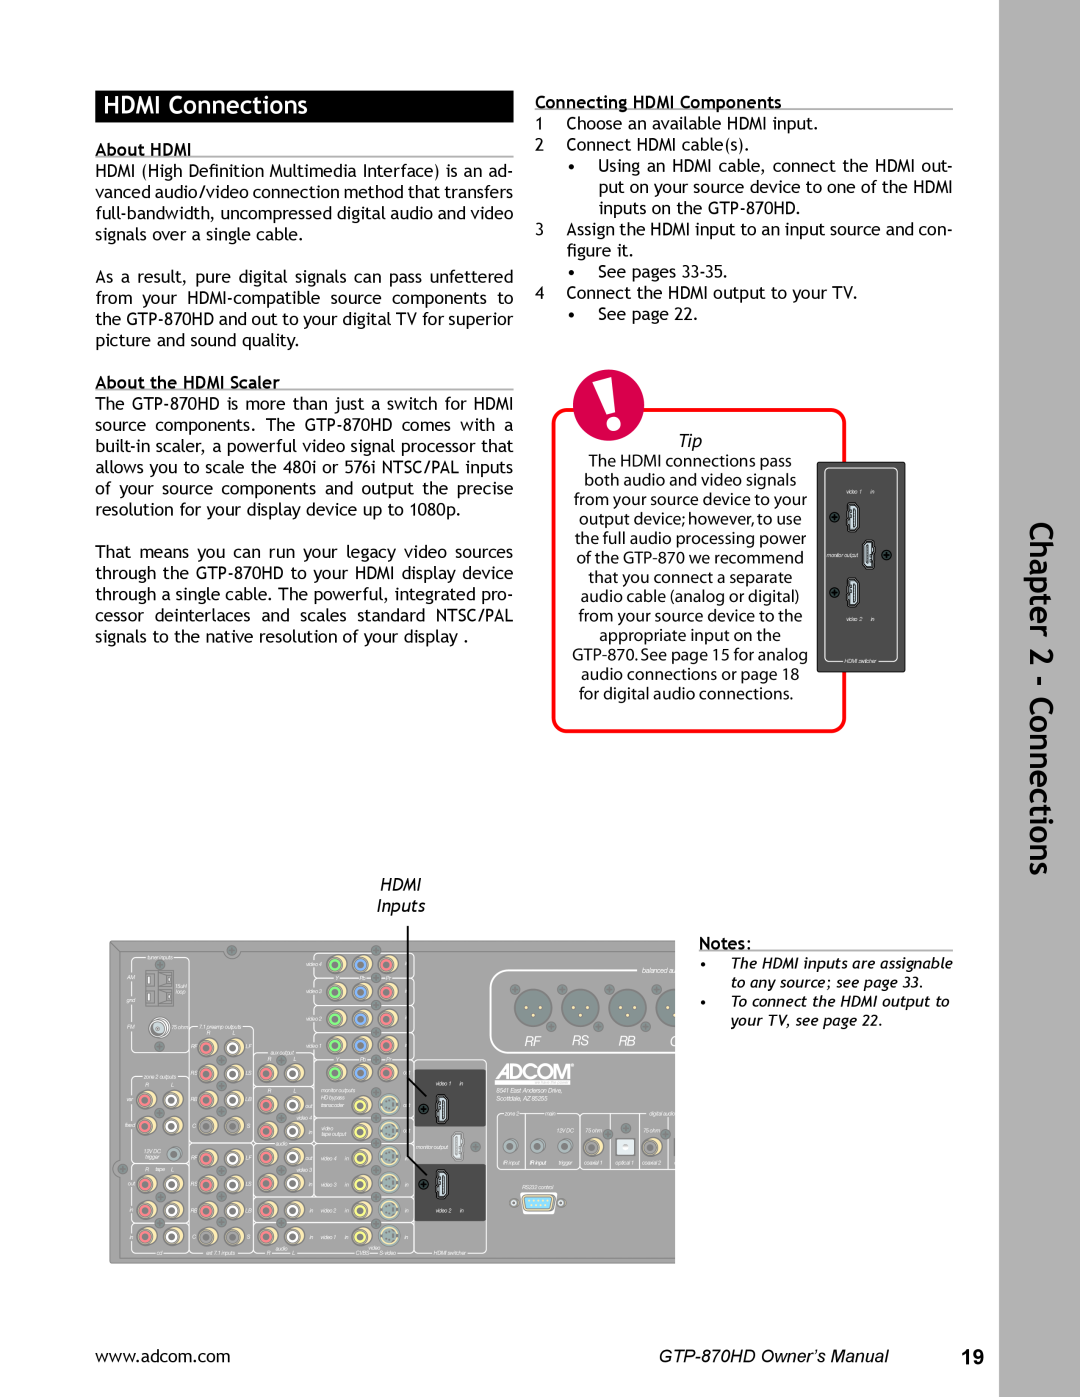 Adcom GTP-870HD user manual HDMI Connections, About HDMI, About the HDMI Scaler, HDMI Inputs, Connecting HDMI Components 